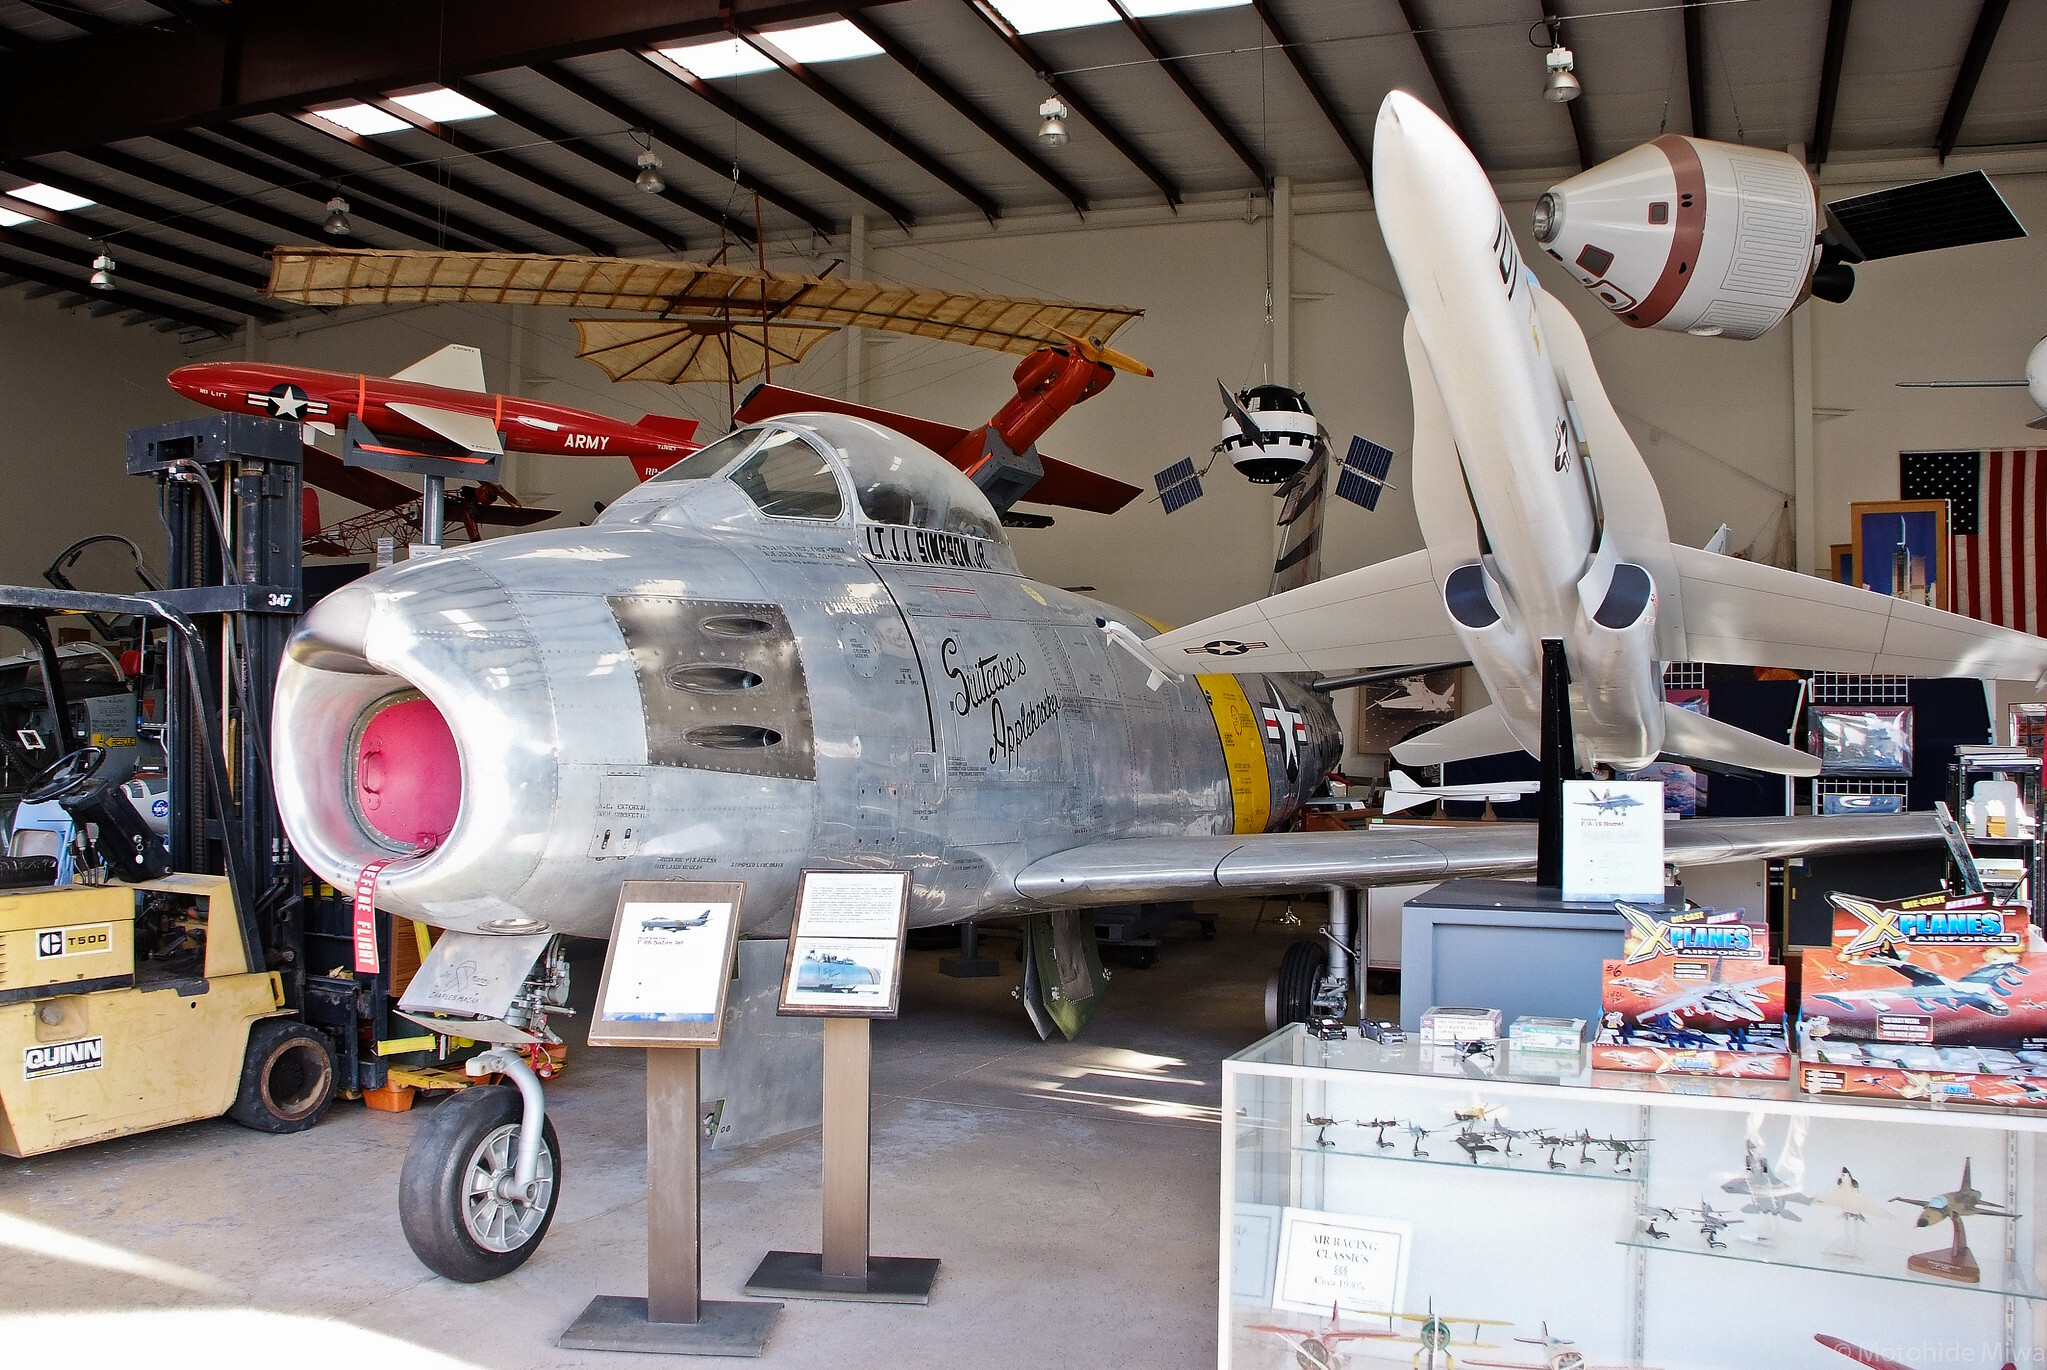 P86 Saber Jet at the Western Museum of Flight by Moto "Club4AG" Miwa via Flickr/CC BY-SA 2.0